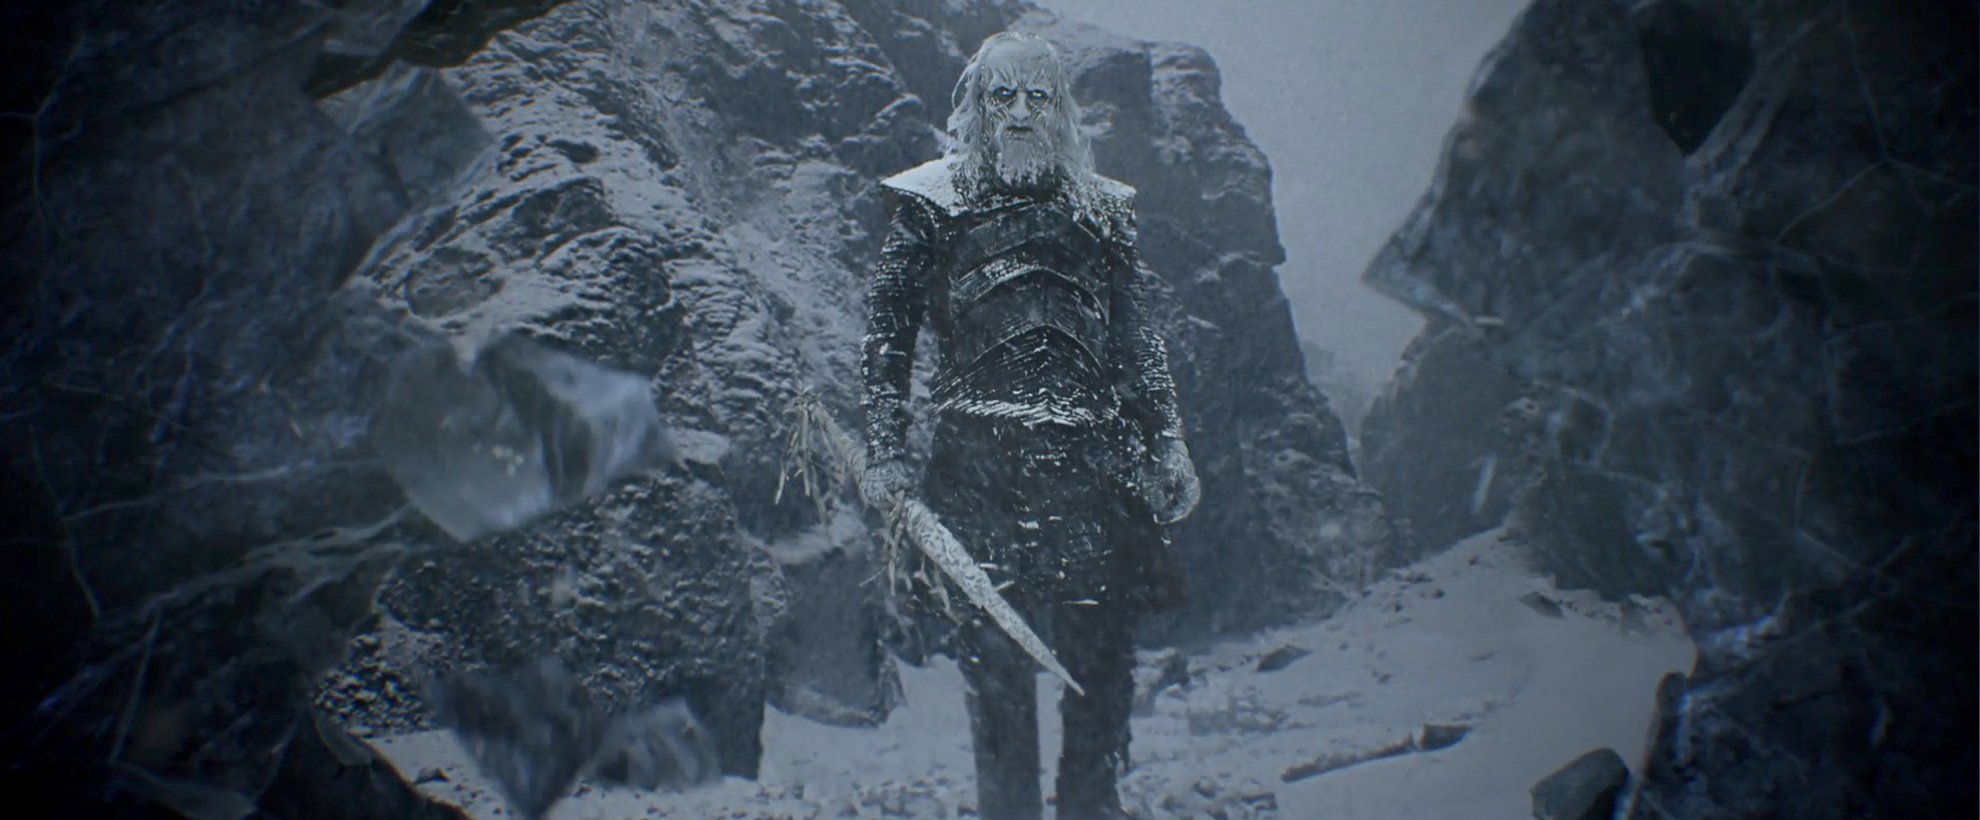 White Walker from Game of Thrones stands in a snowy rocky terrain. He is pure white with ice blue eyes, wears gray armor and holds an icy sword